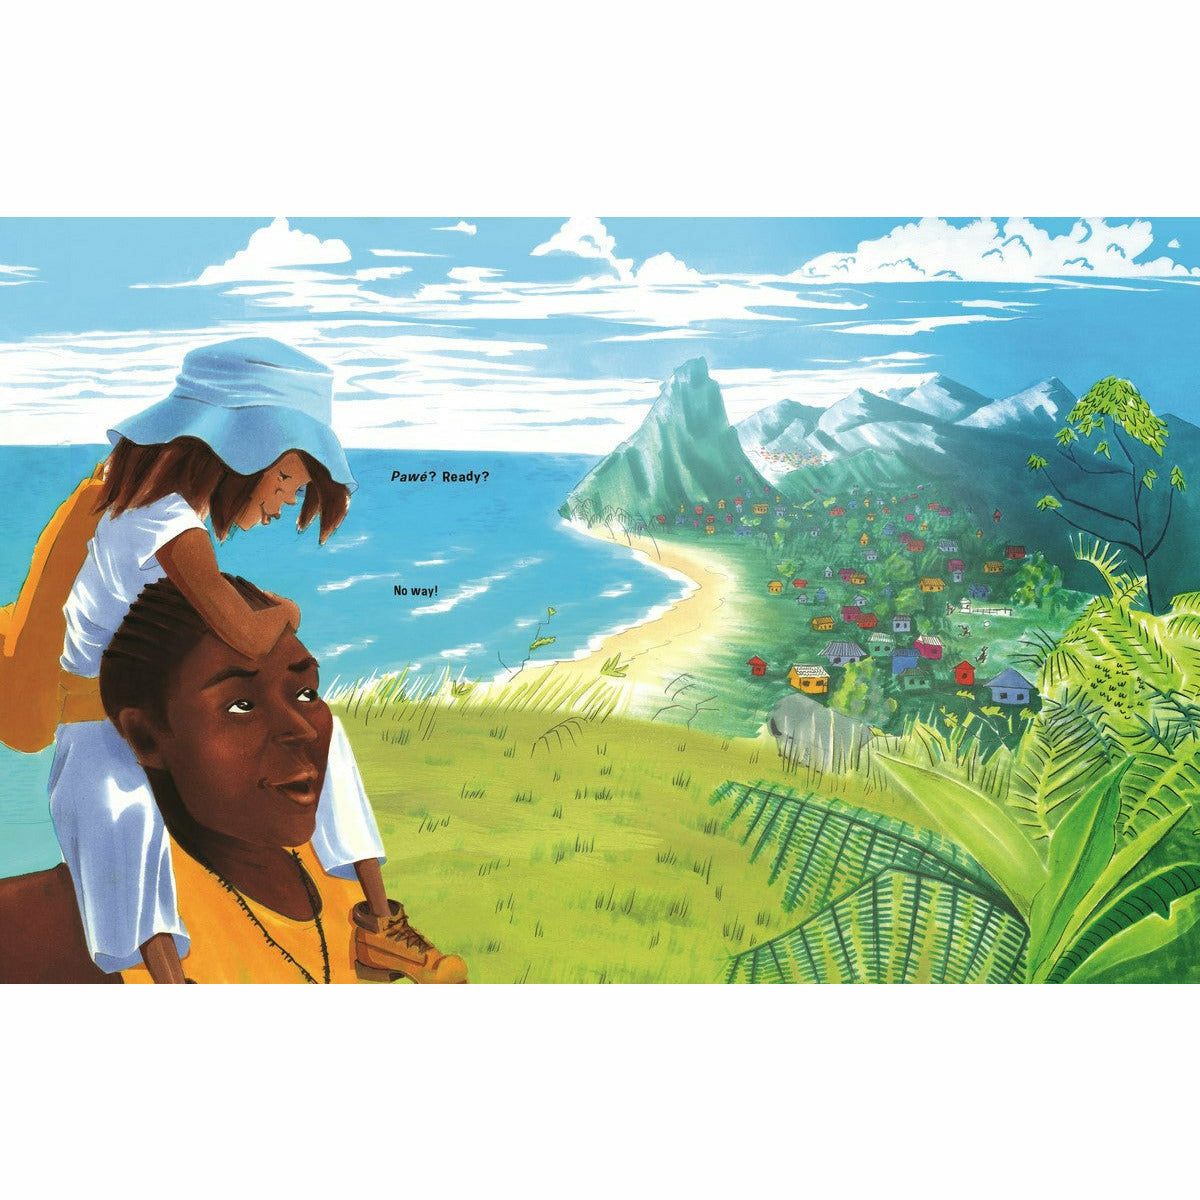 Climb On! by Baptiste Paul, illustrated by Jacqueline Alcántara, front cover of a childrens picture book the image is of a father and daughter climbing a mountain in a tropical setting looking out over the ocean. They have reached the top